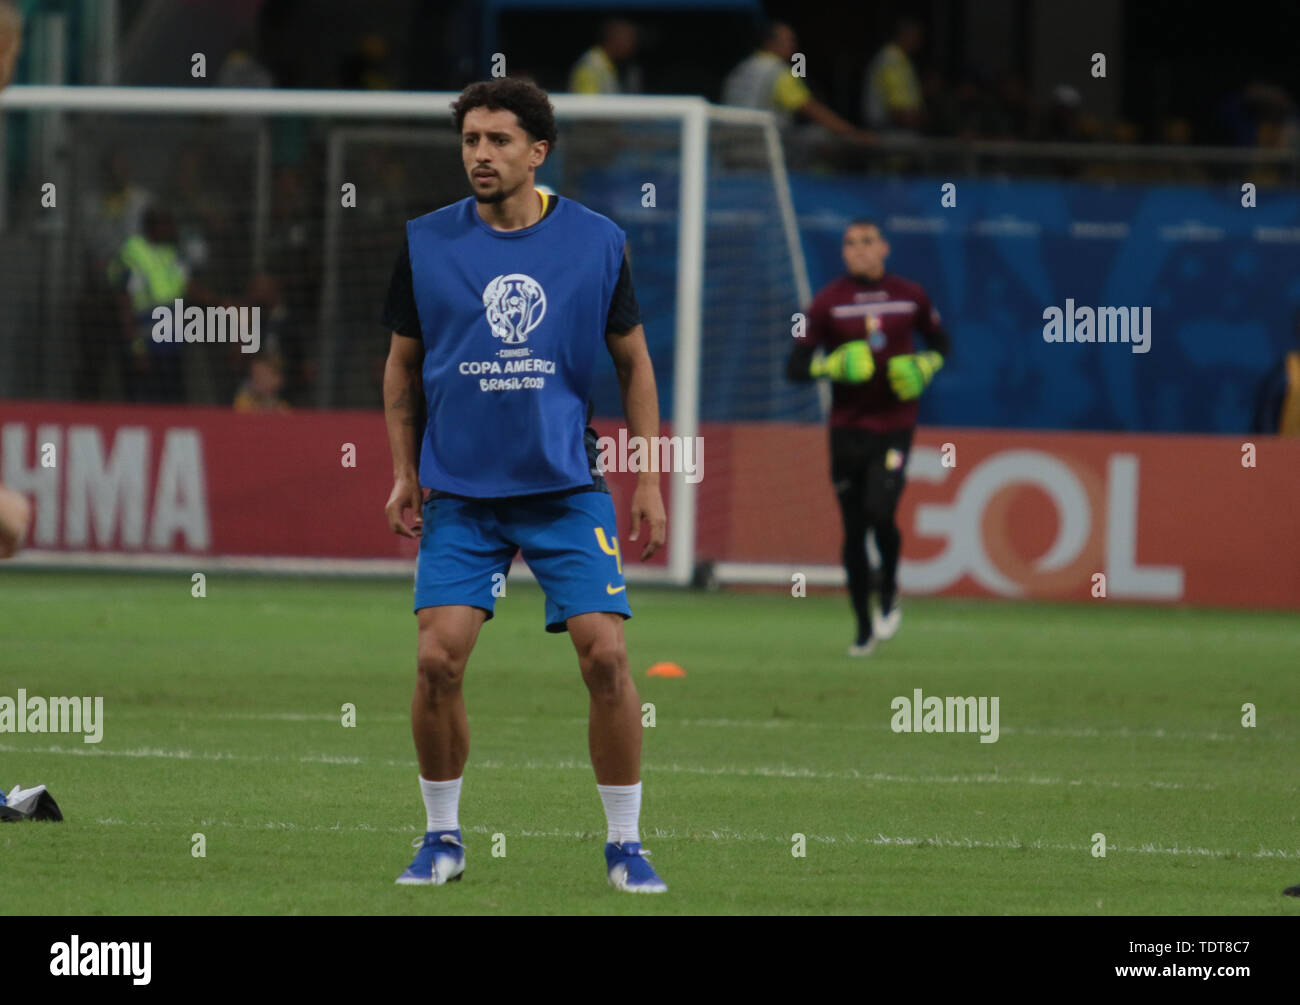 Salvador, Brazil. 18th June, 2019. Maquinhos, a player of the Brazilian national team, before the match between Brazil and Venezuela, valid for the 2019 Copa America group stage, held on Tuesday (18) at the Fonte Nova Arena in Salvador, Bahia, Brazil. Credit: Tiago Caldas/FotoArena/Alamy Live News Stock Photo